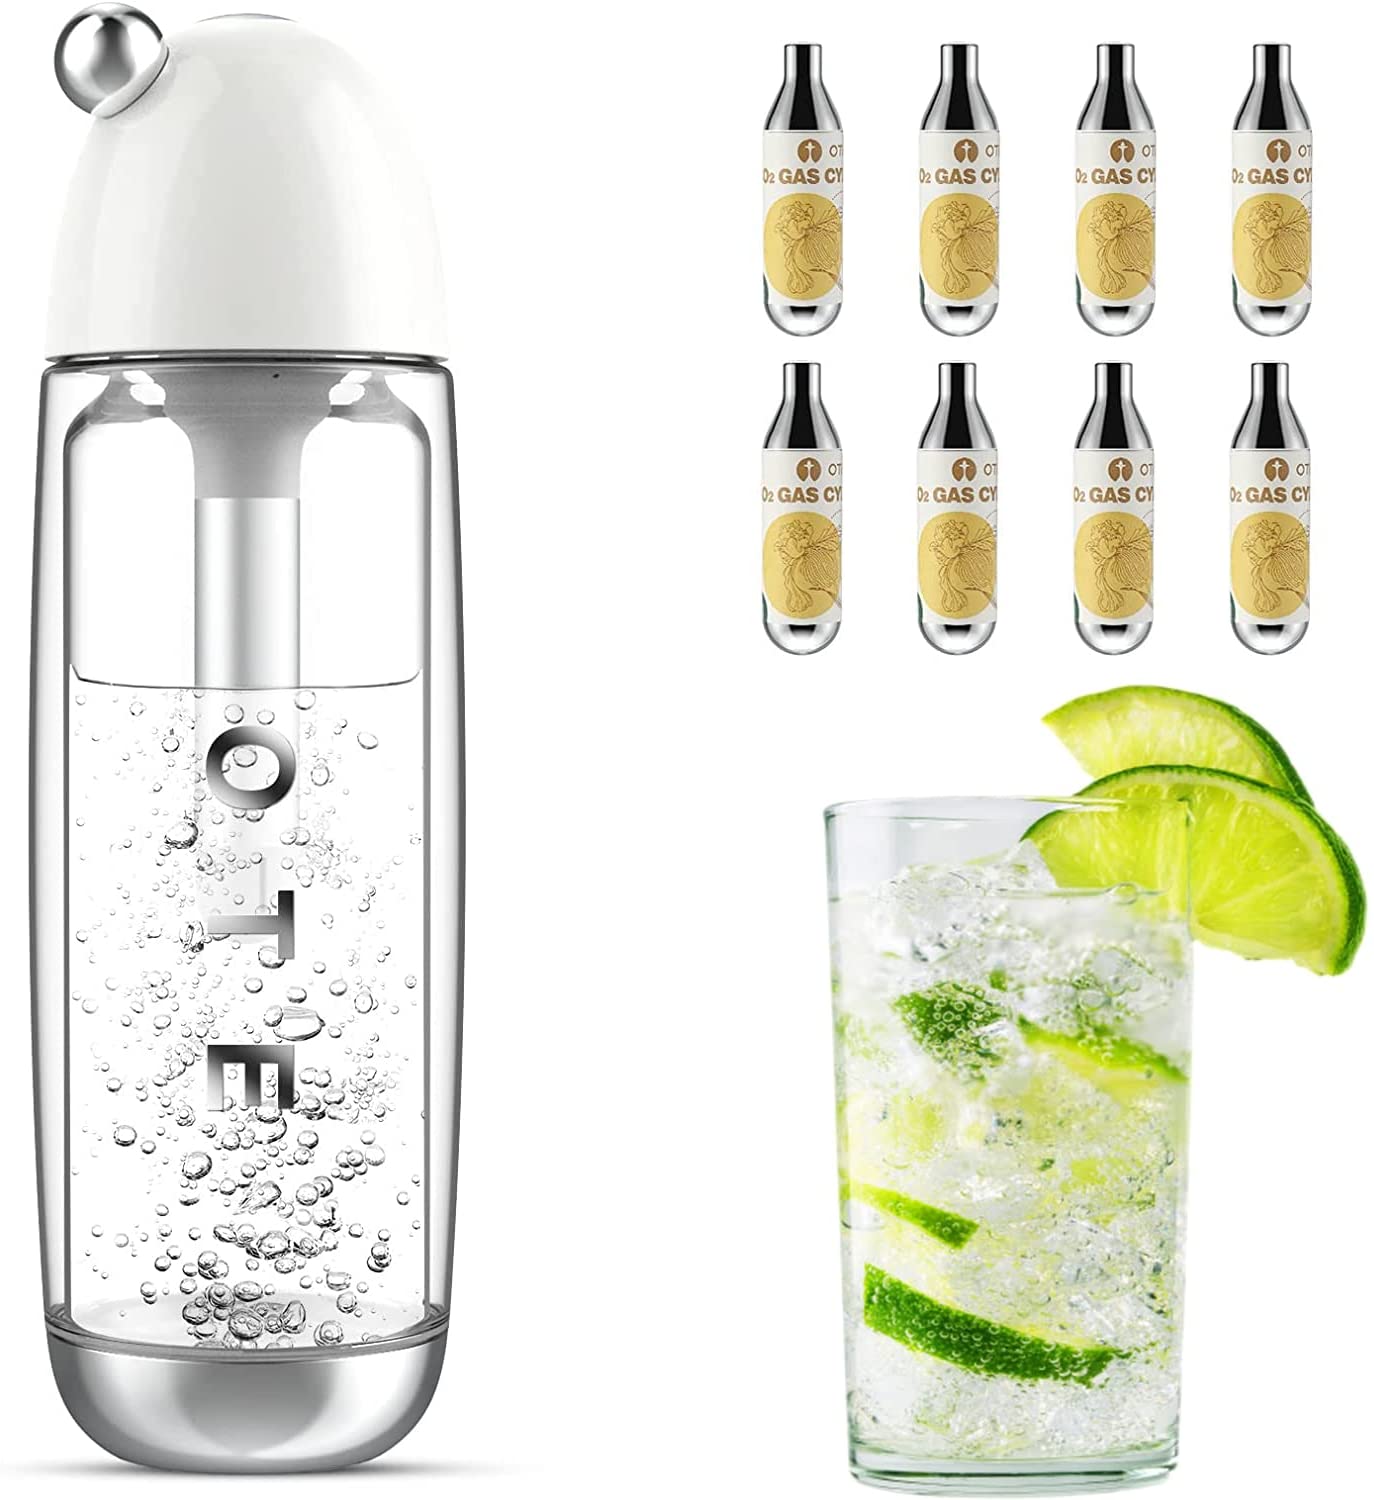 OTE Portable Water Carbonator with 8 CO2 Cylinders, Easy Water Carbonator Set, Value Pack, BPA-Free PET Bottle 450 ml, Protable Sparkling Water Maker for Home, Bar, Gym, Office & Outdoor Use, ‎white